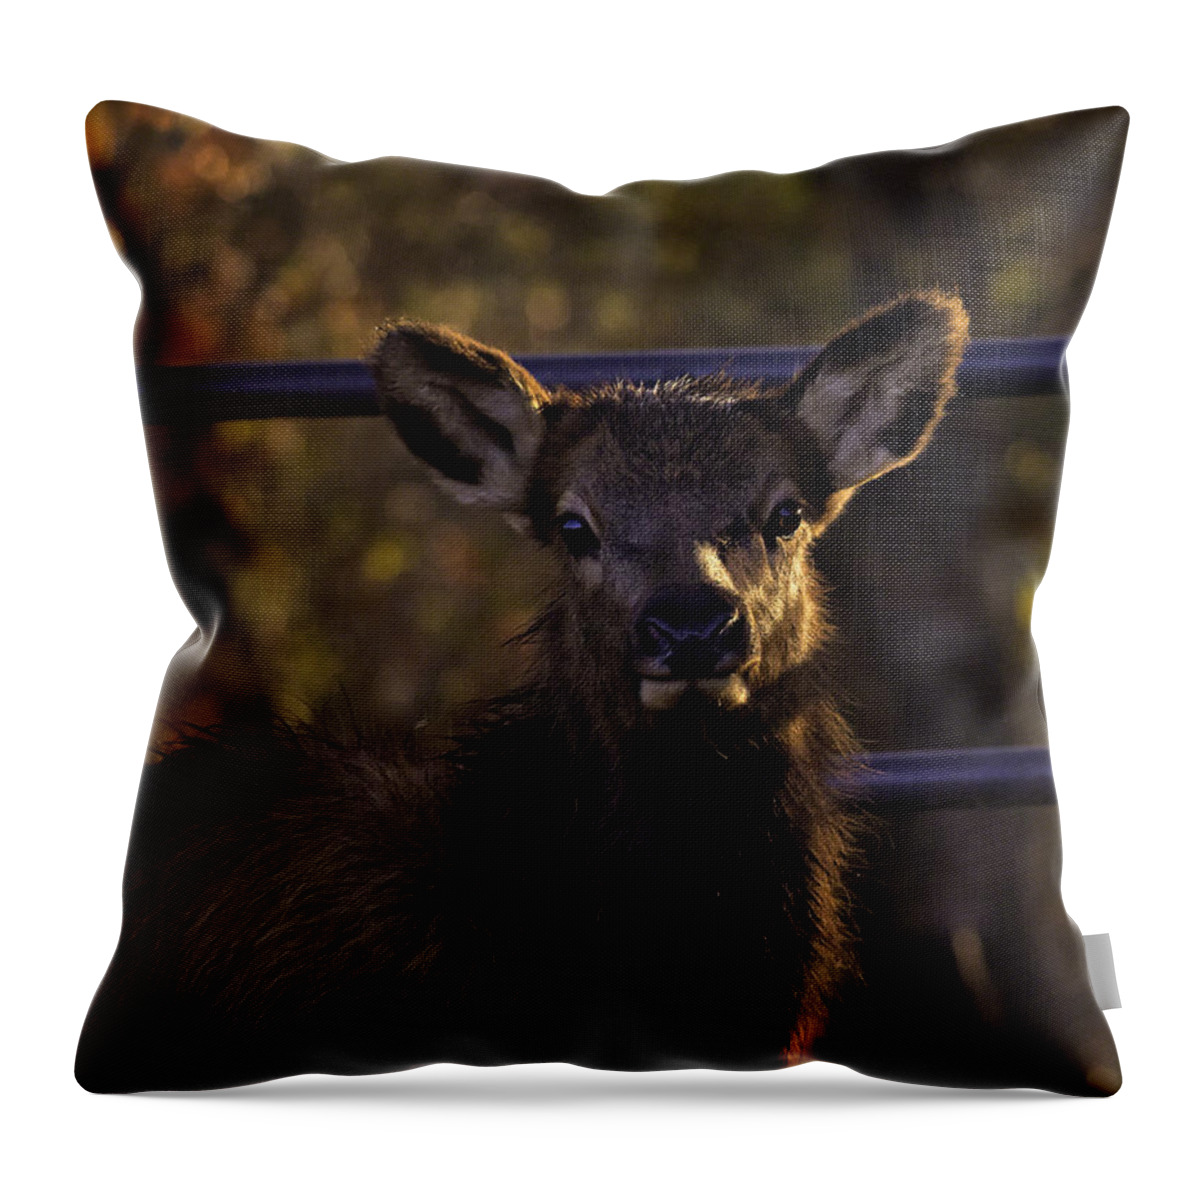 Elk Calf Throw Pillow featuring the photograph Calf Elk by Gate at Sunrise by Michael Dougherty